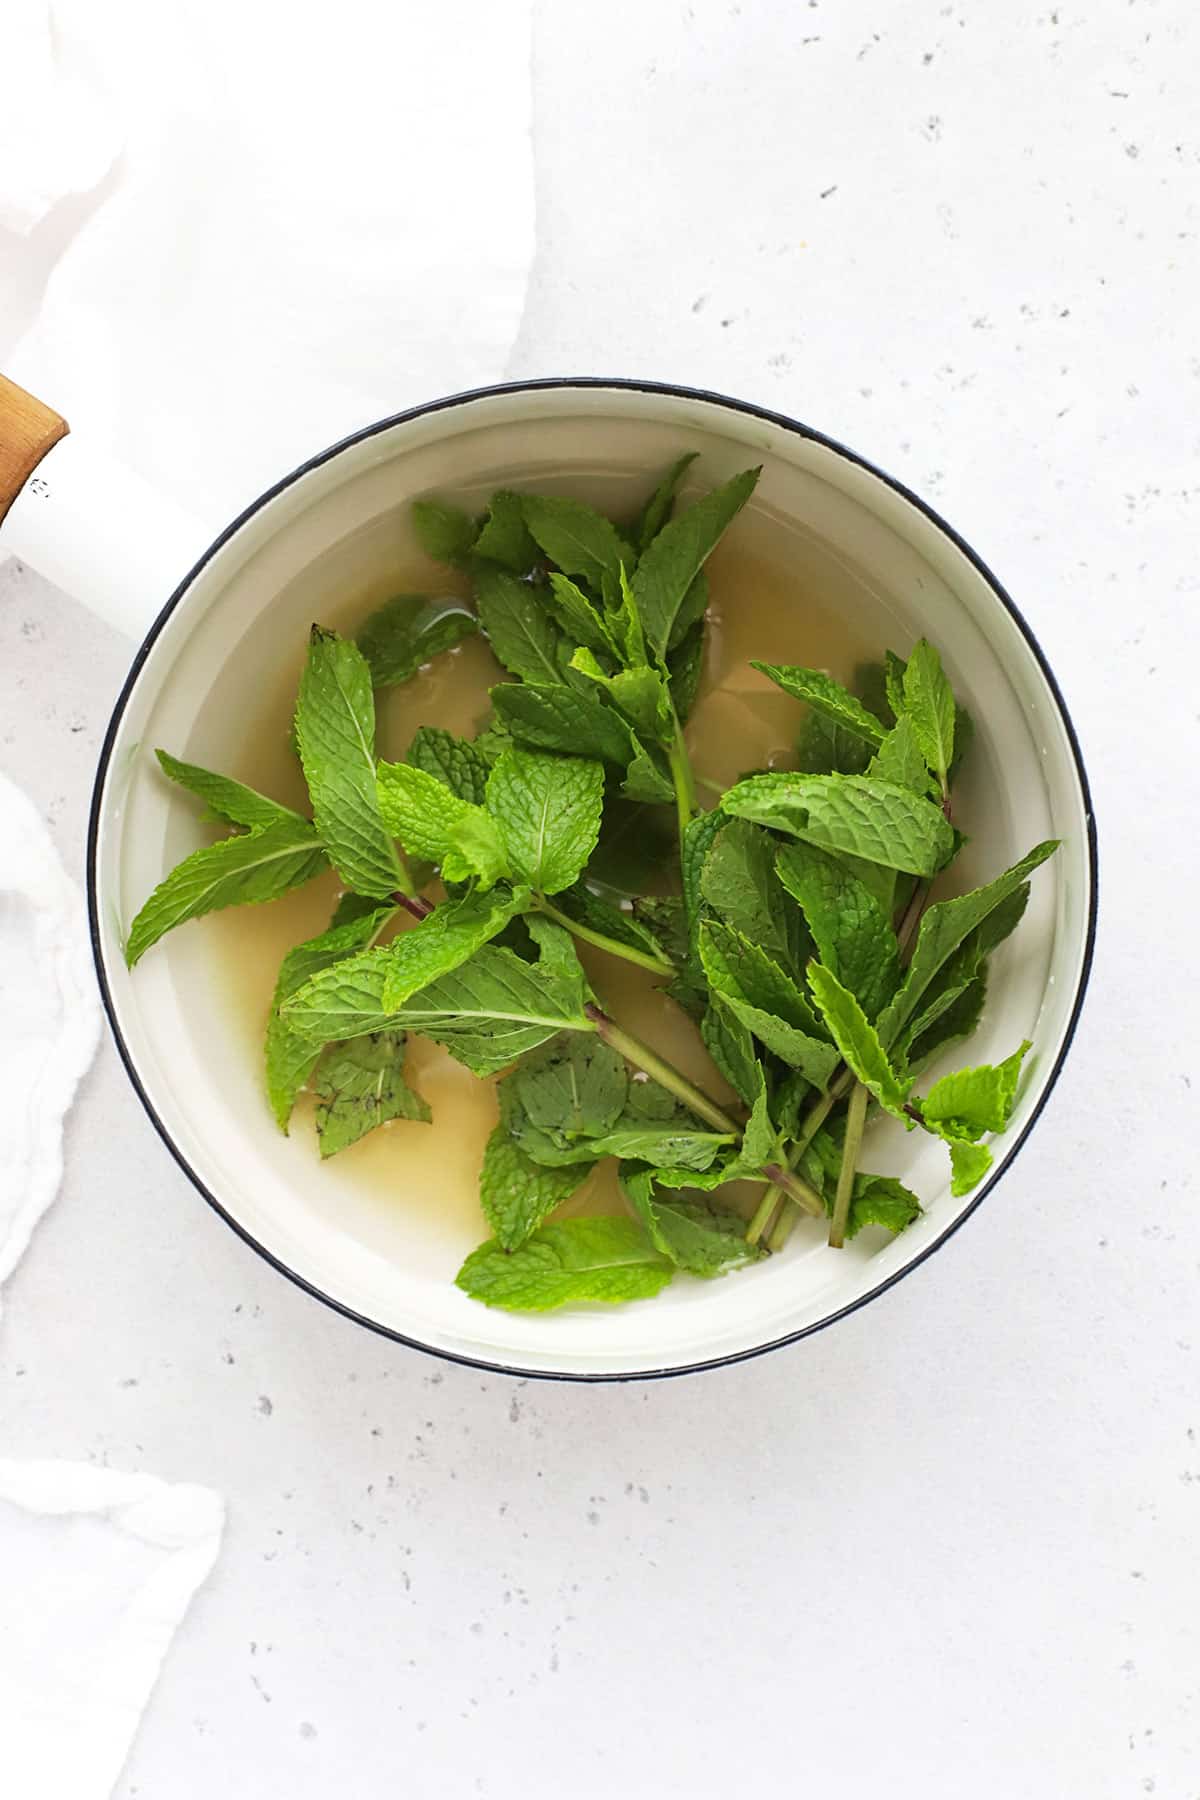 Steeping mint leaves to make mint simple syrup